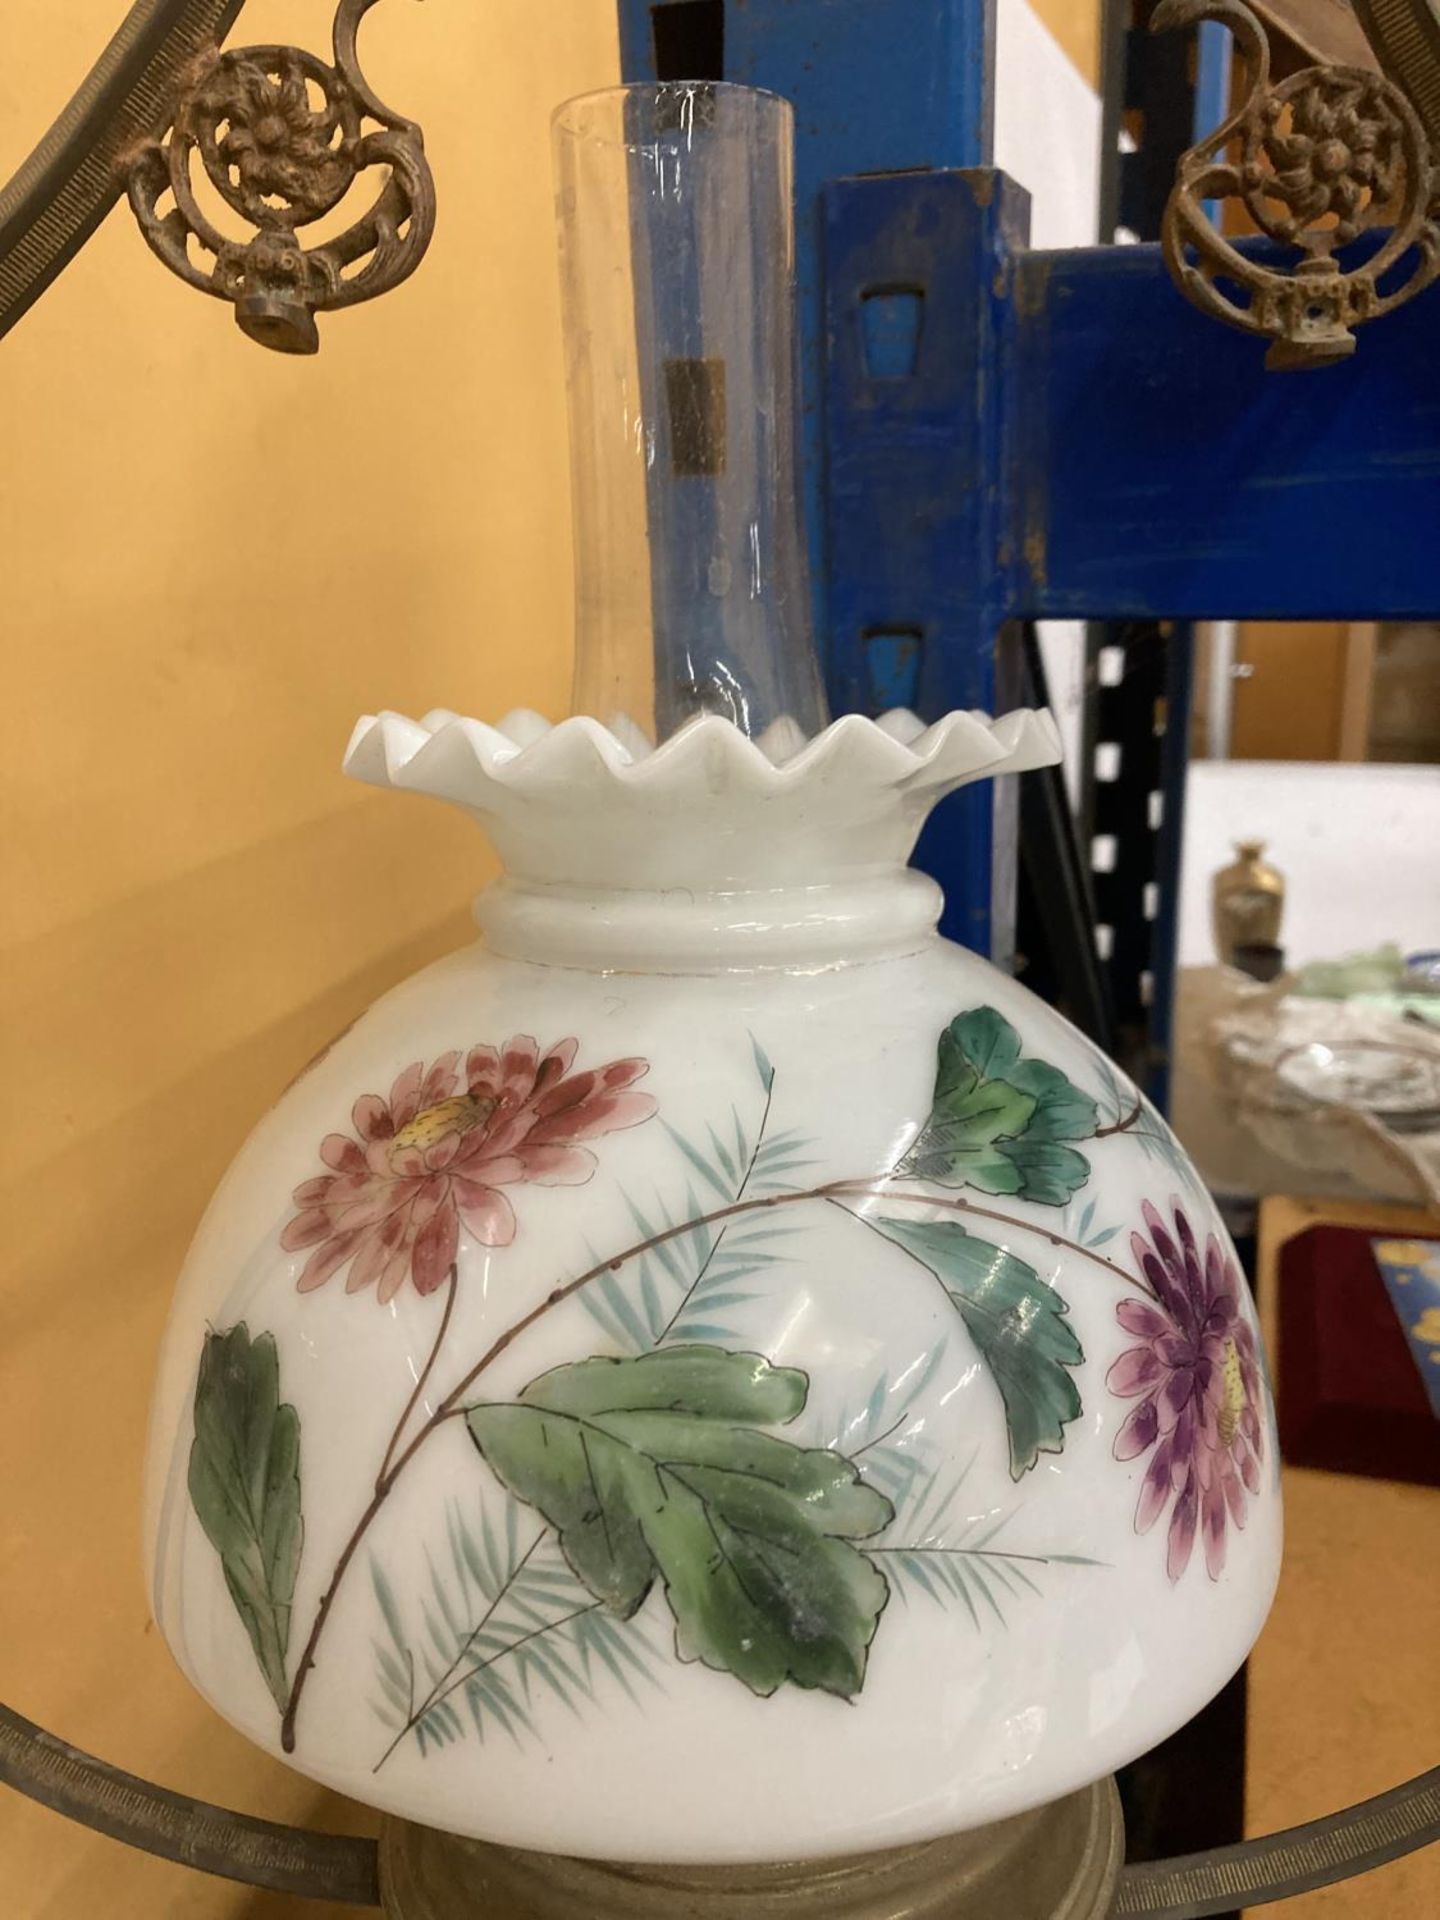 A VINTAGE HANGING OIL LAMP WITH PAINTED GLASS SHADE AND FLAMINGO DECORATION - Image 3 of 5